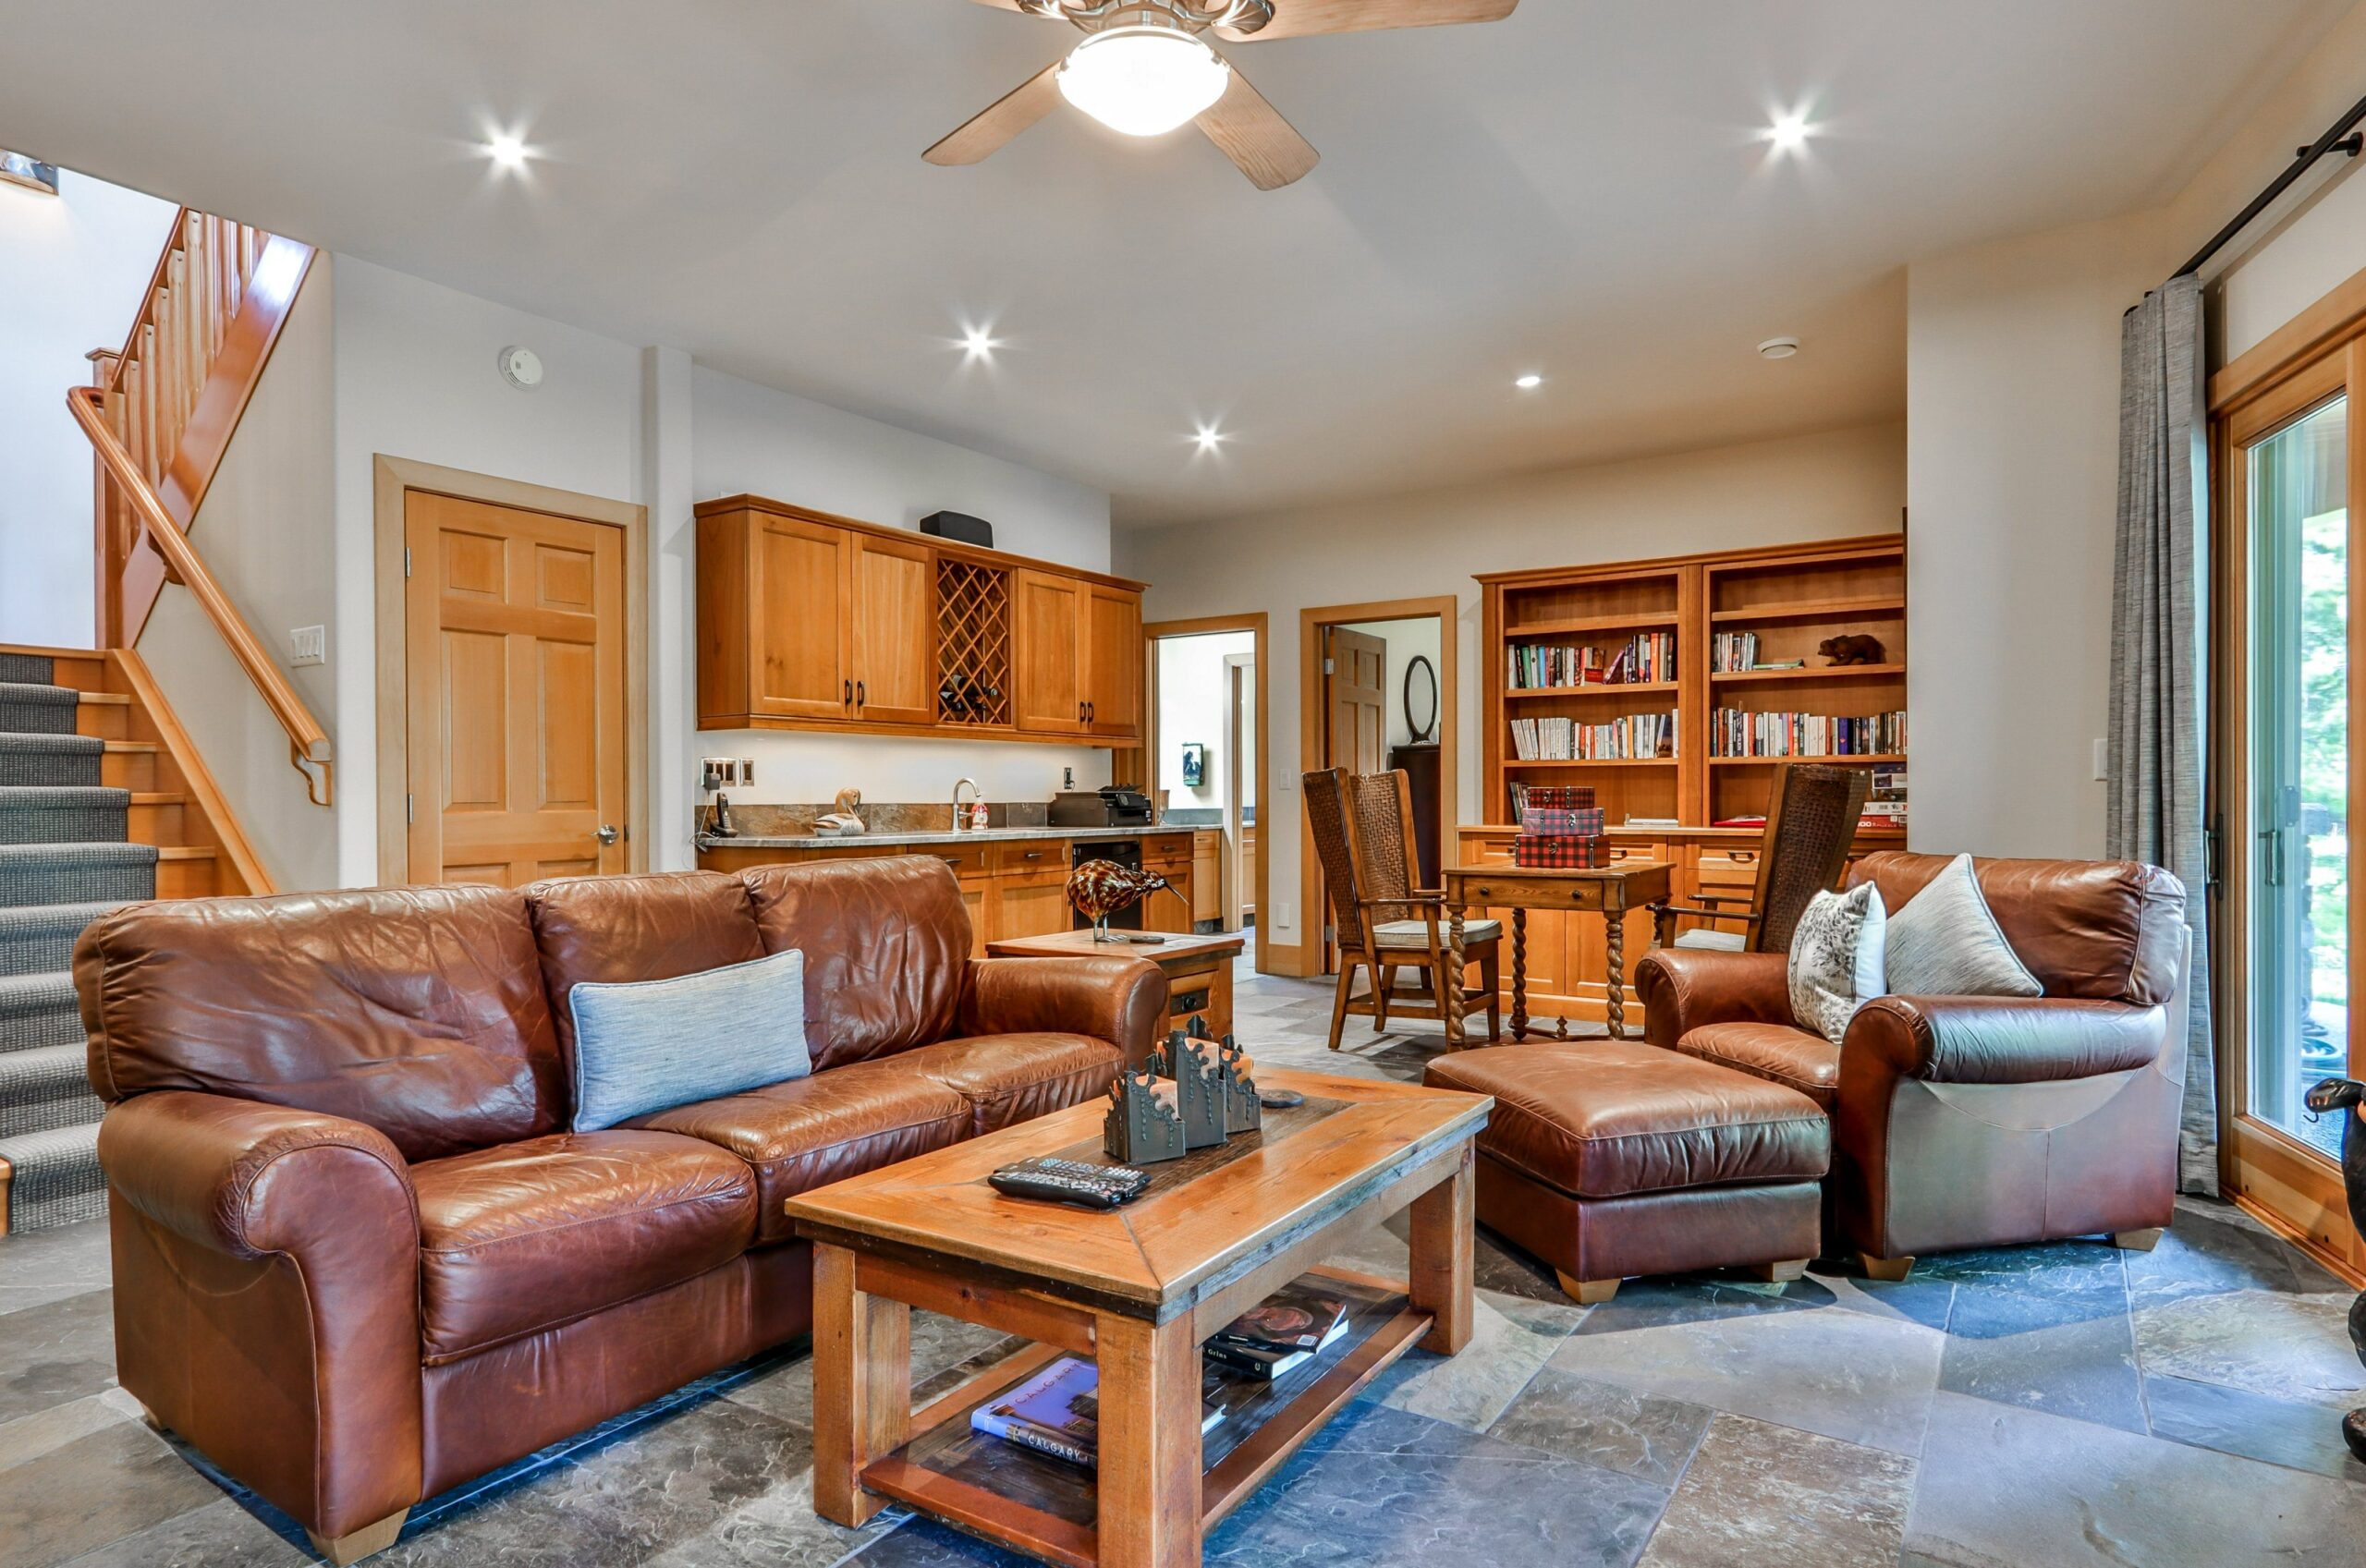 A family room with couches in the middle and book shelves in the back